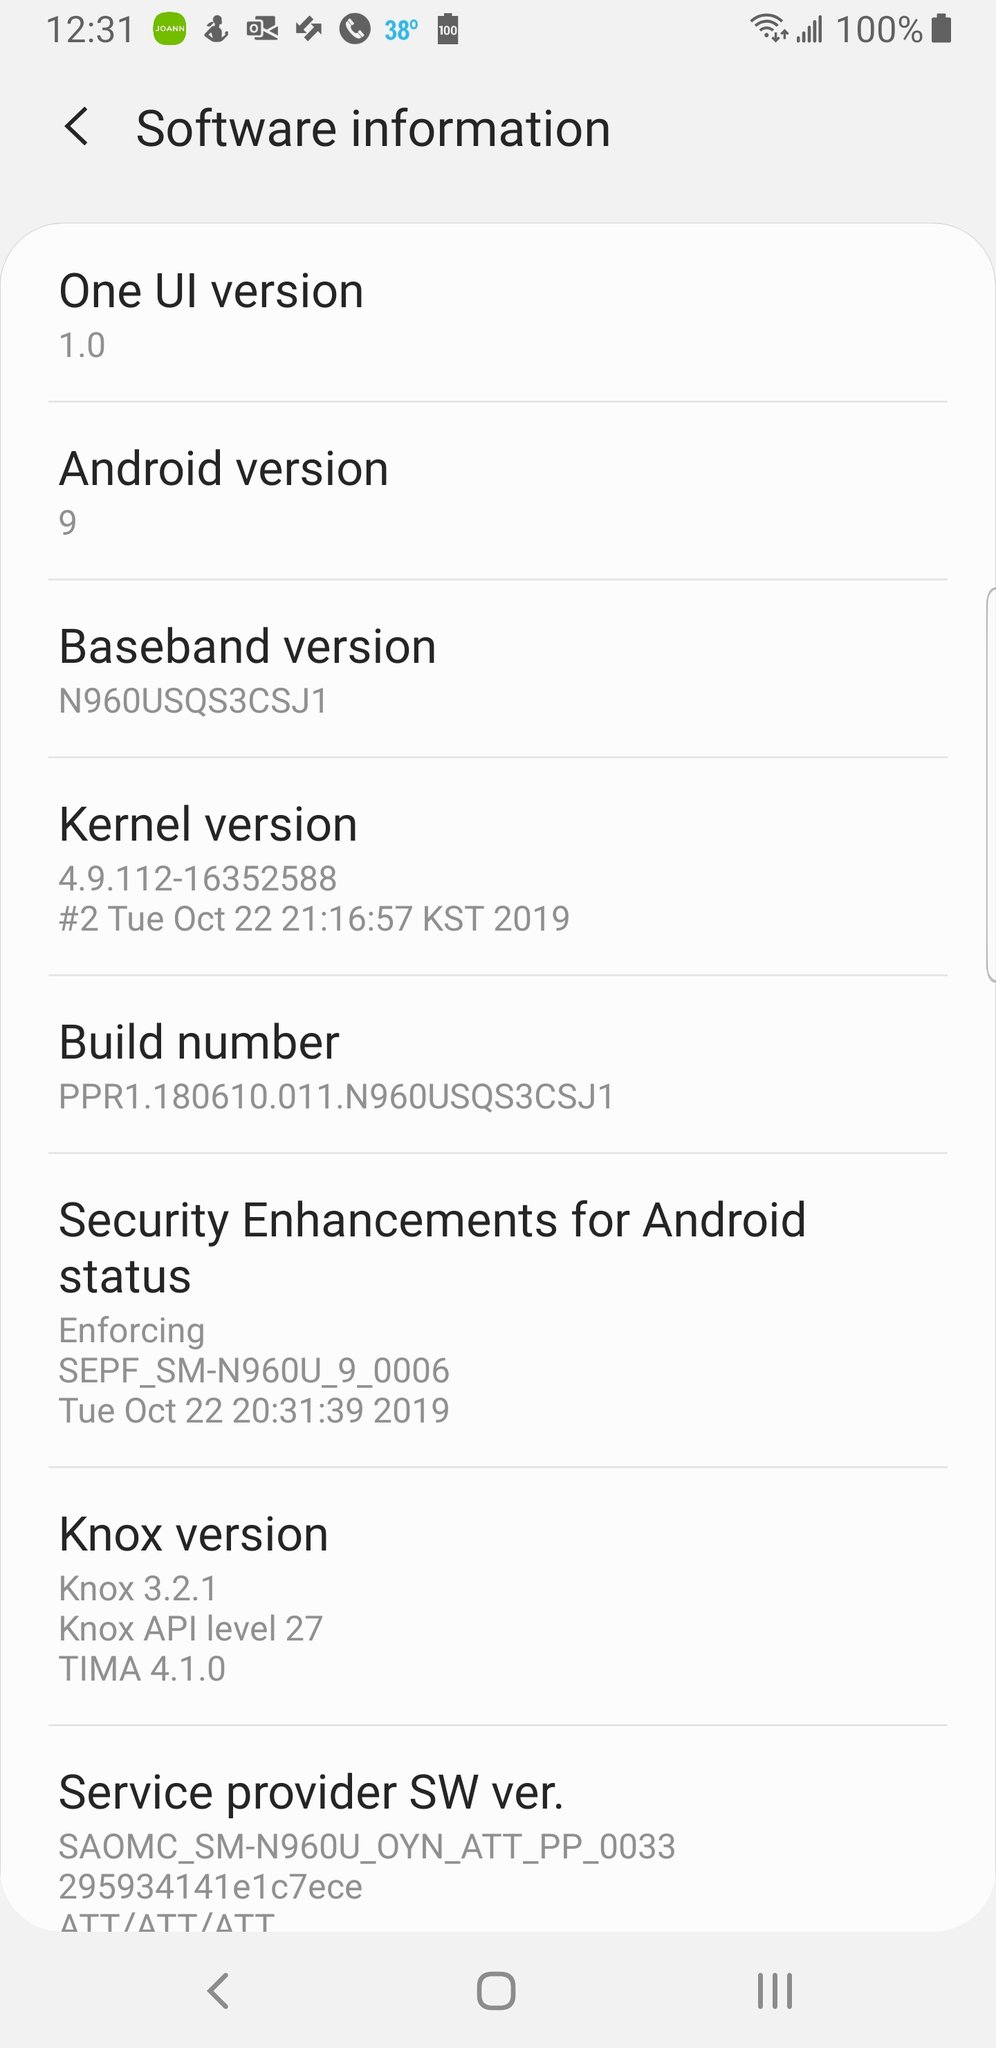 AT&T Galaxy Note 9 received Android 10 (One UI 2.0) update